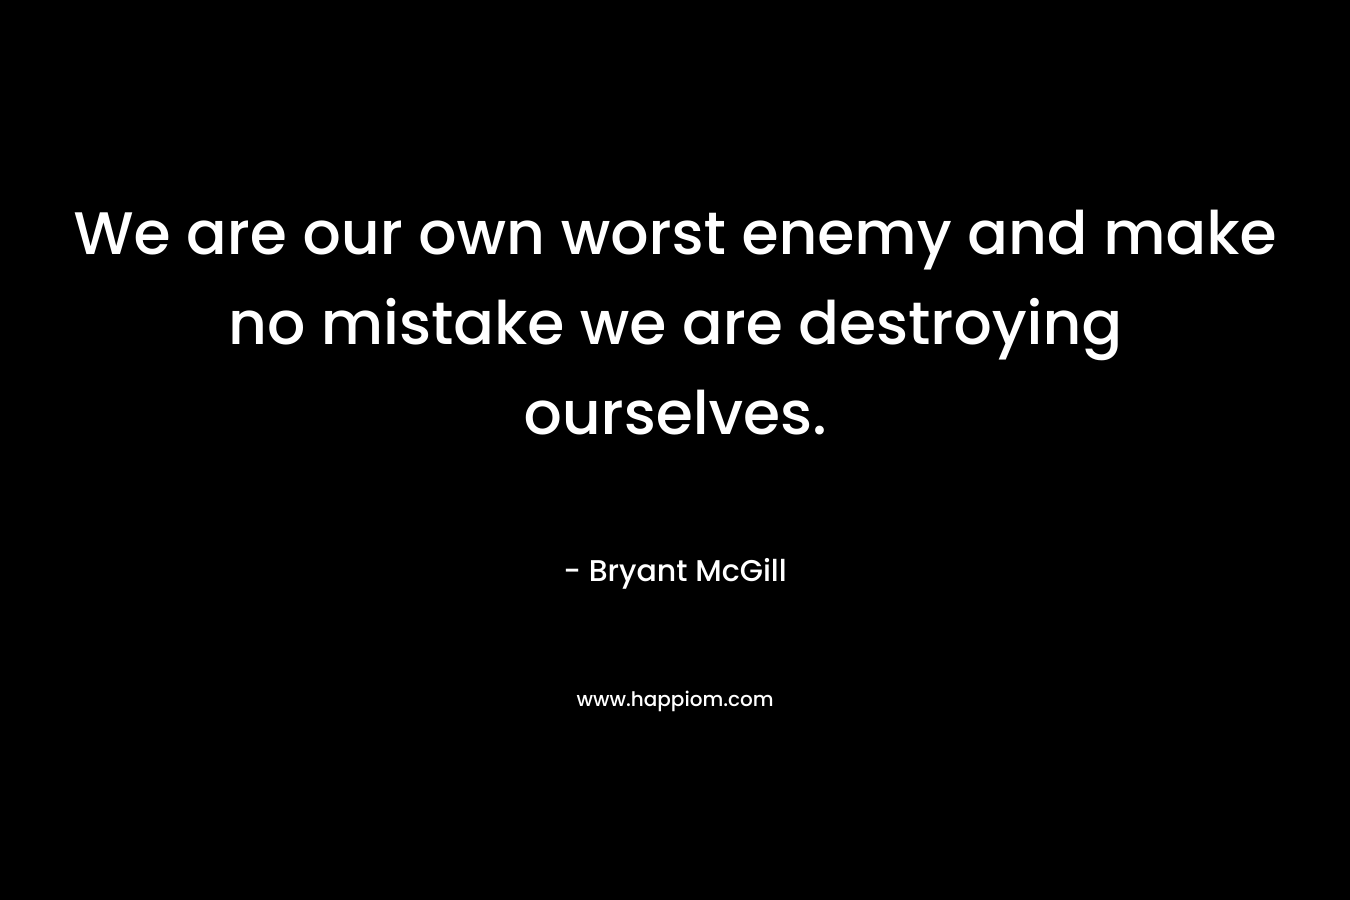 We are our own worst enemy and make no mistake we are destroying ourselves.